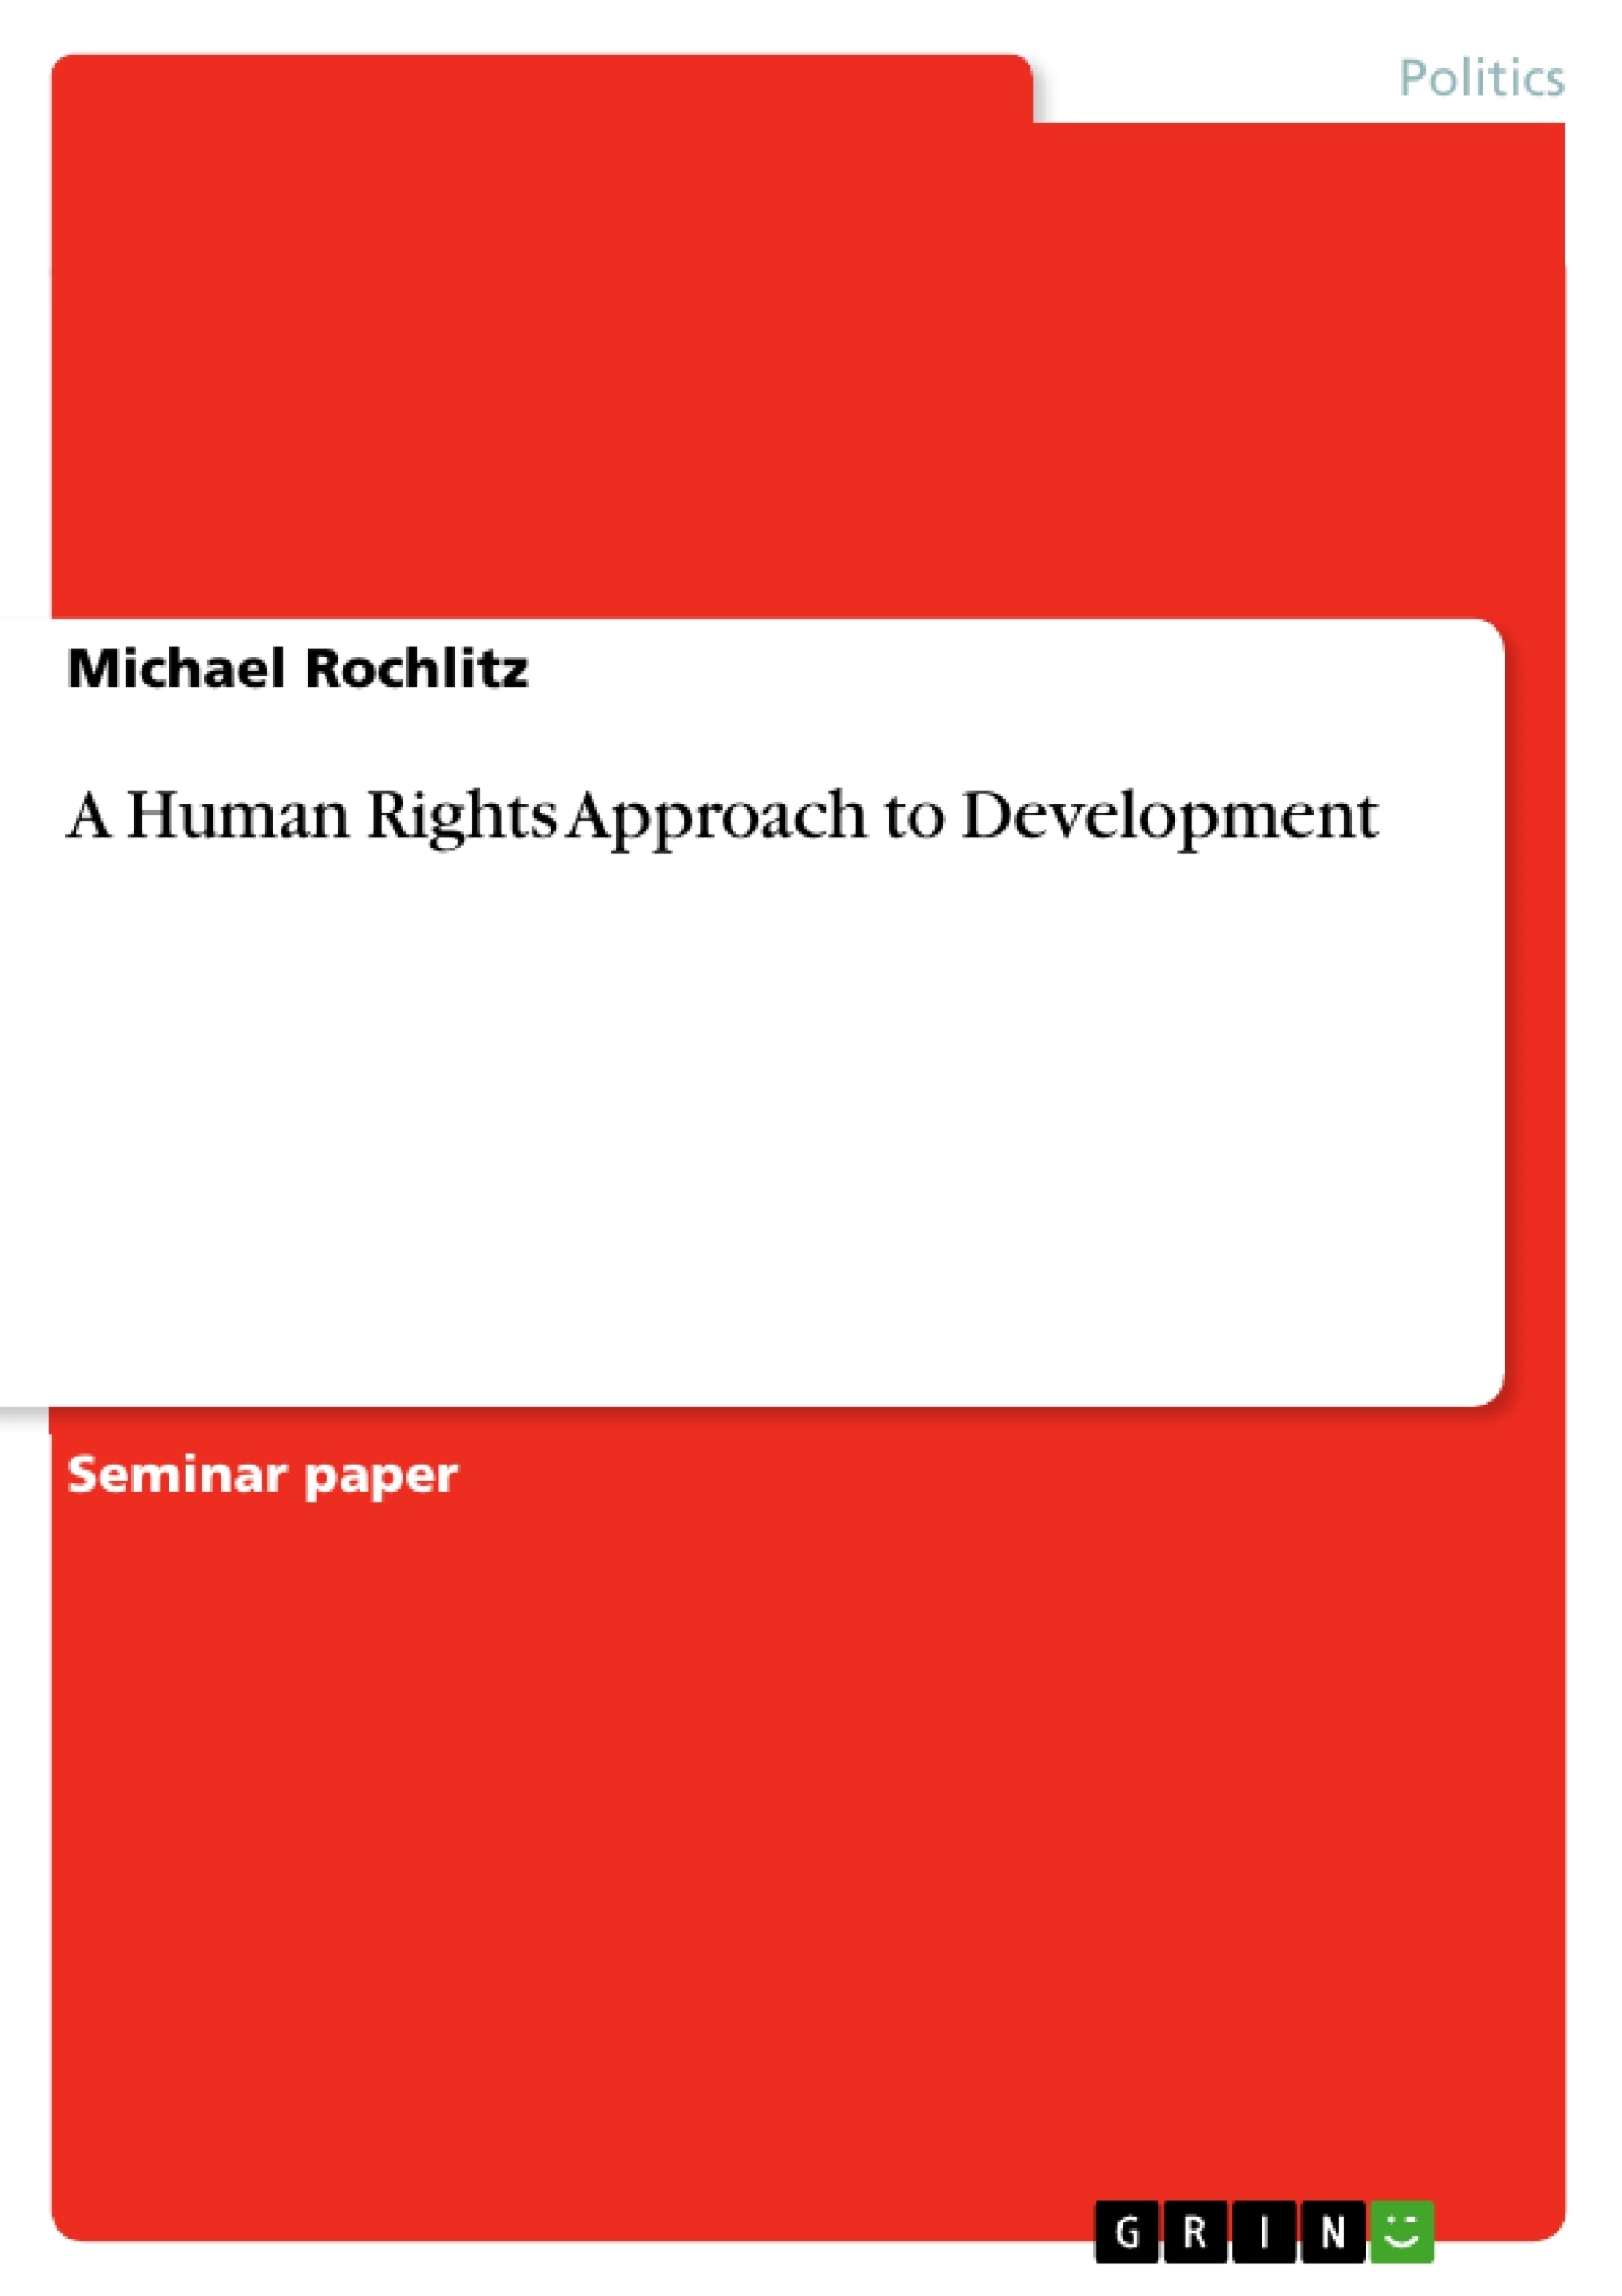 Title: A Human Rights Approach to Development